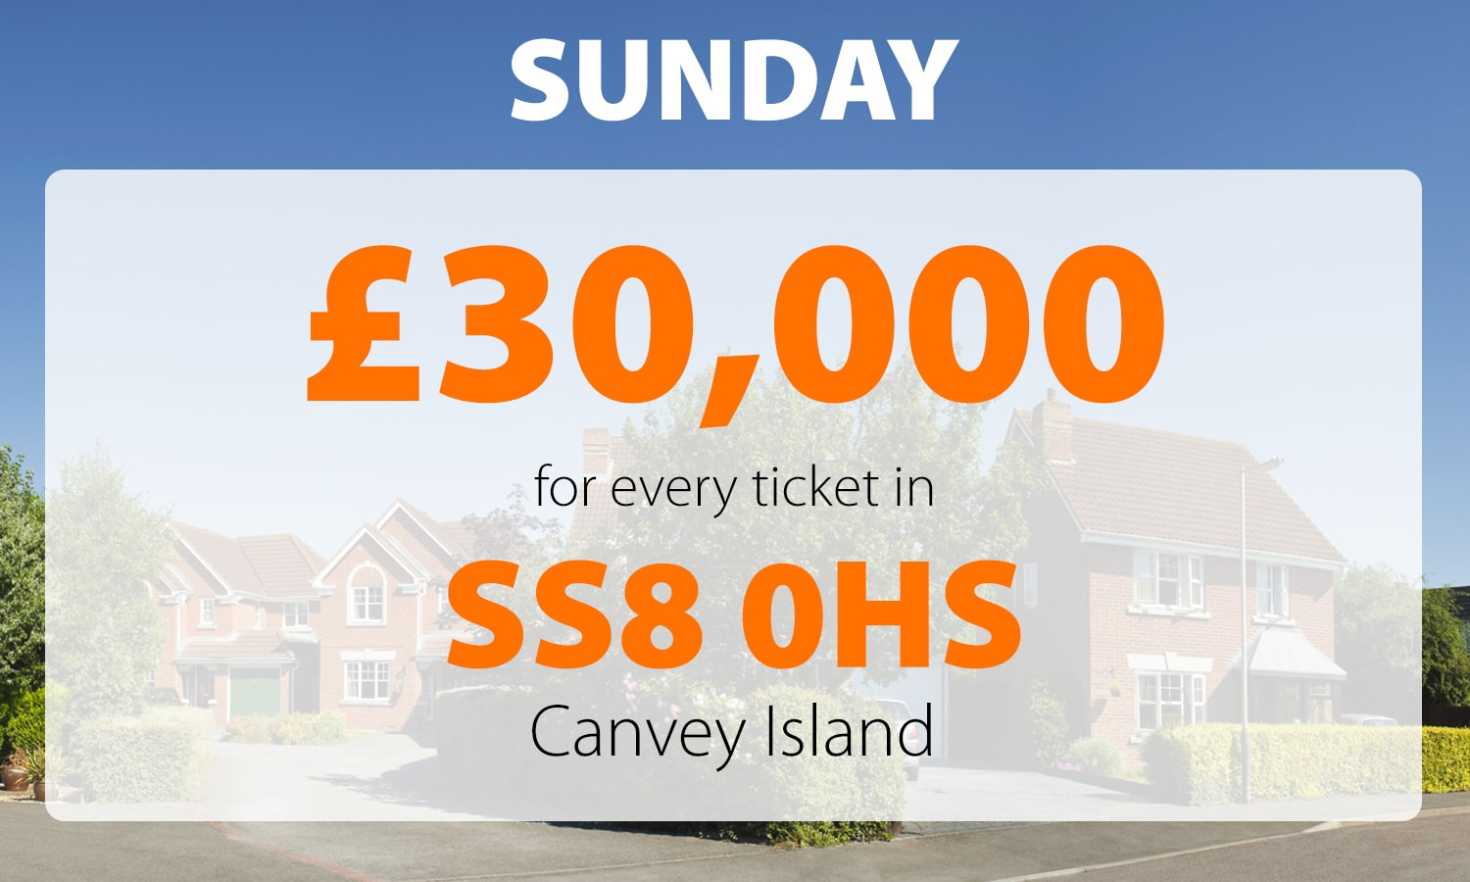 Sunday's £30,000 Street Prize landed in lucky postcode SS8 0HS in Canvey Island